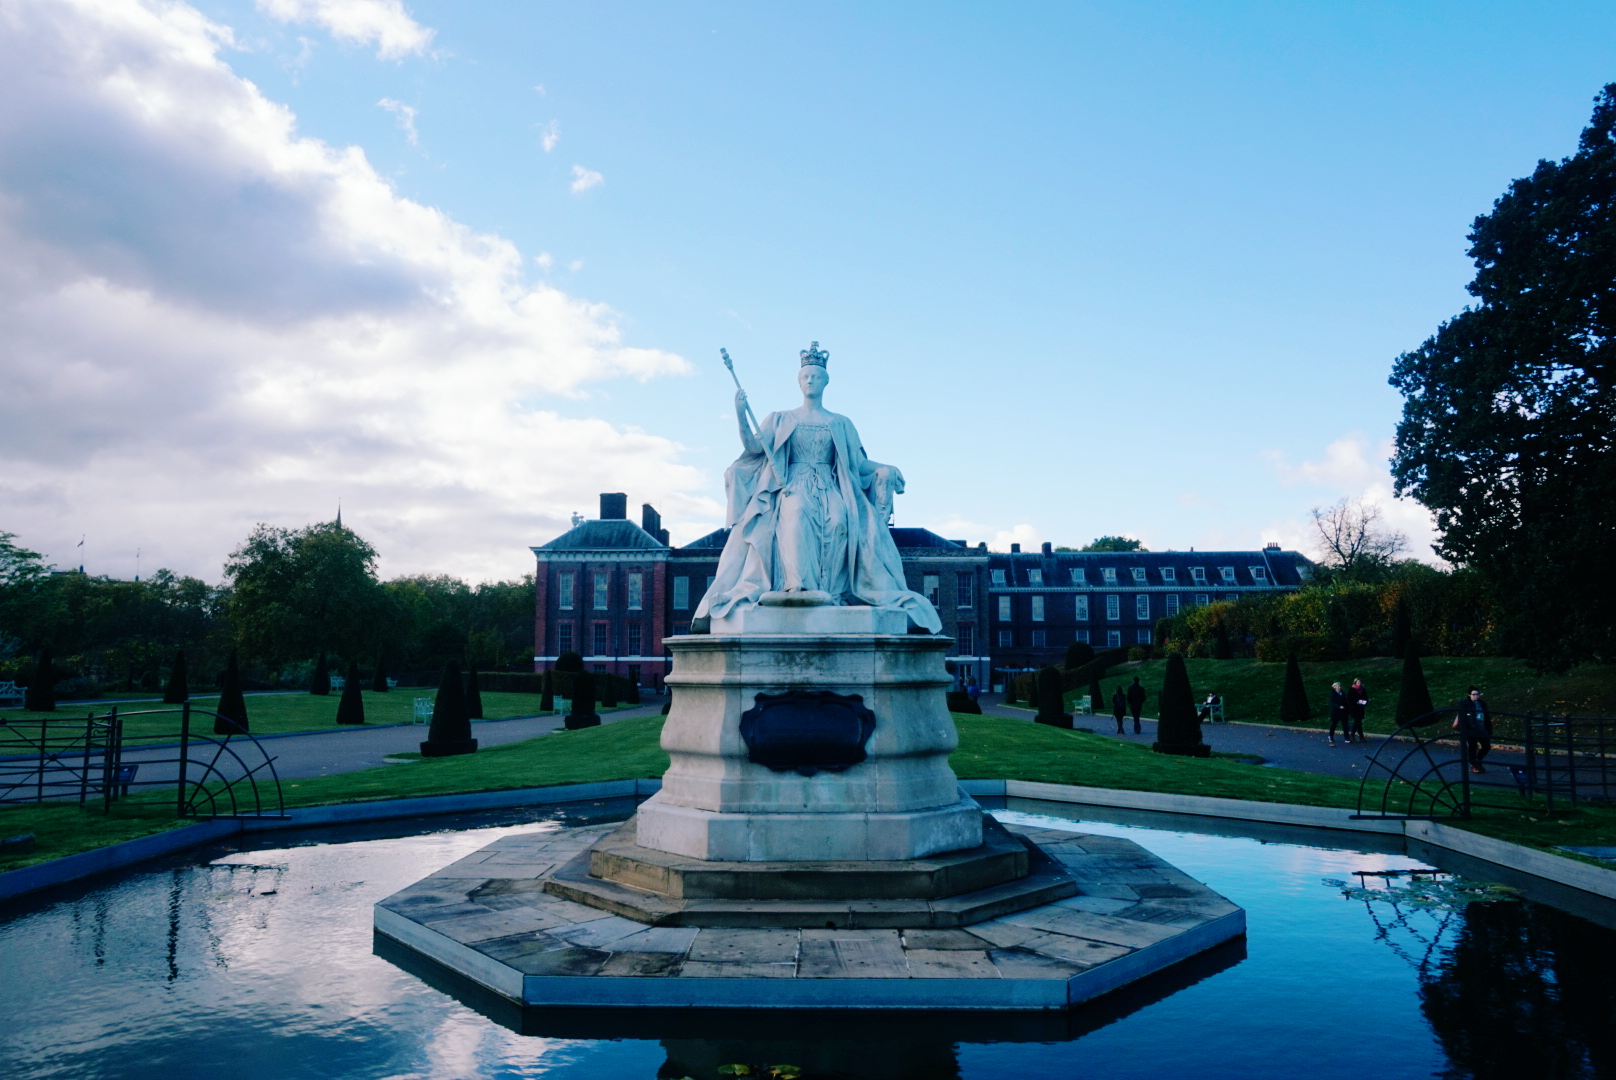 The best things to do in Kensington, London - Kensington Palace Queen Victoria Statue | The LDN Gal